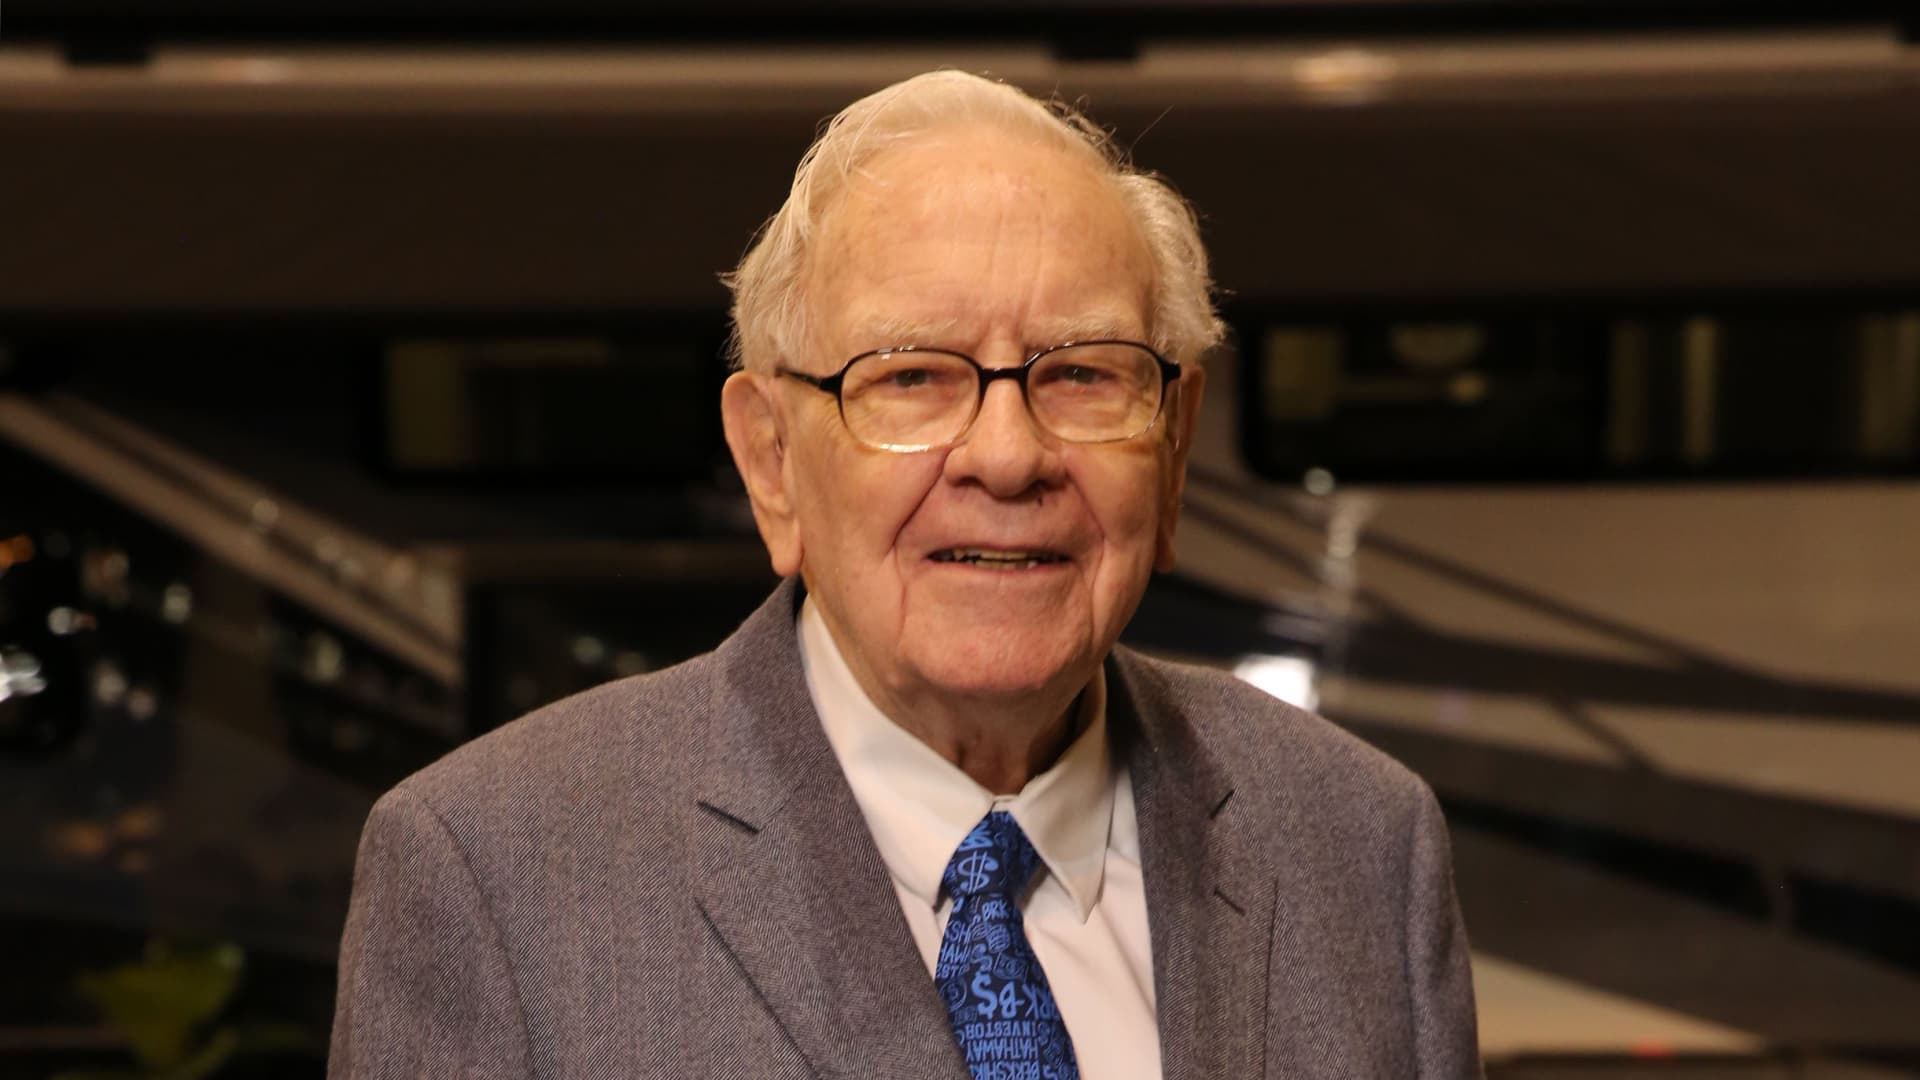 Berkshire Hathaway takes control of LNG facility as Buffett ups bet on energy infrastructure